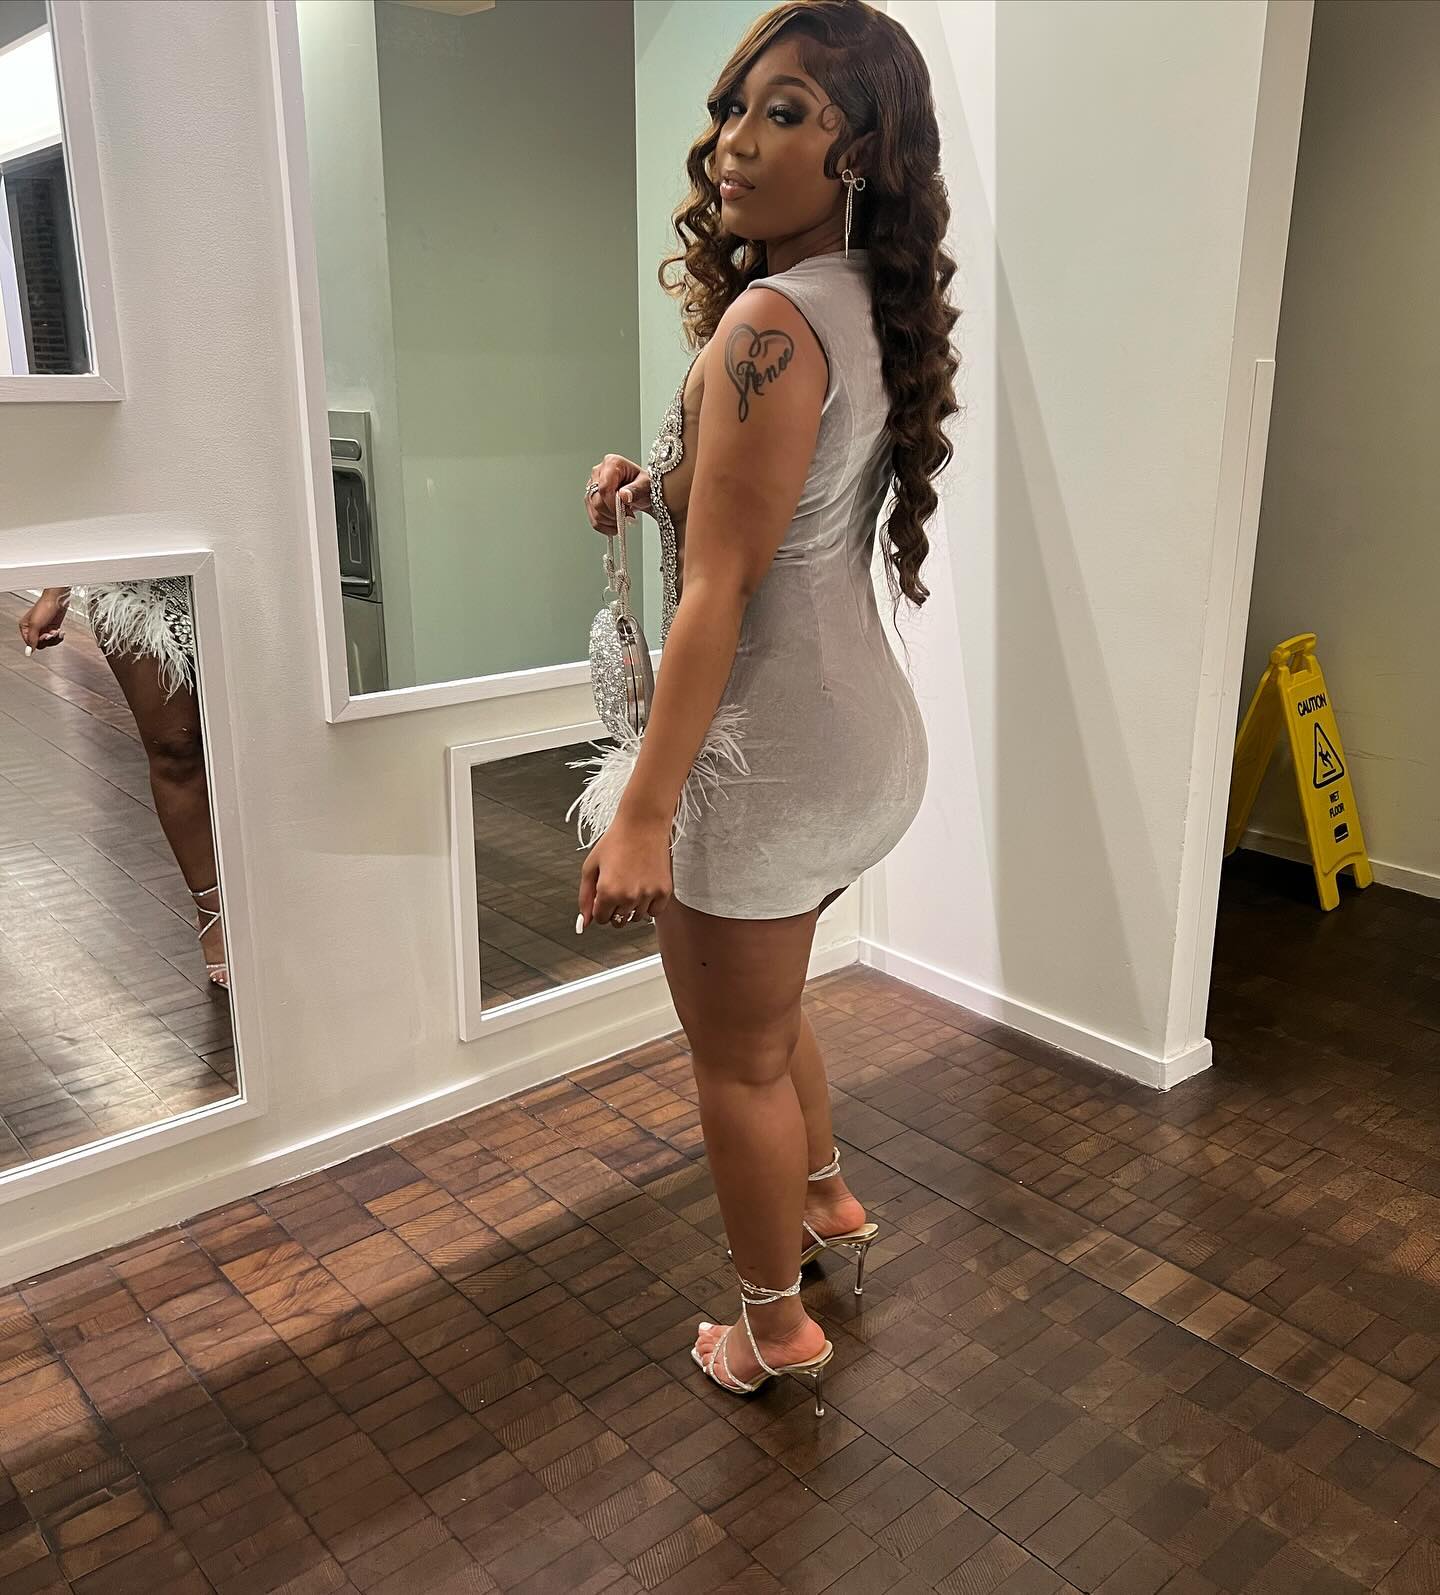 When I’m around Yk you become invisible 👅🥰💎